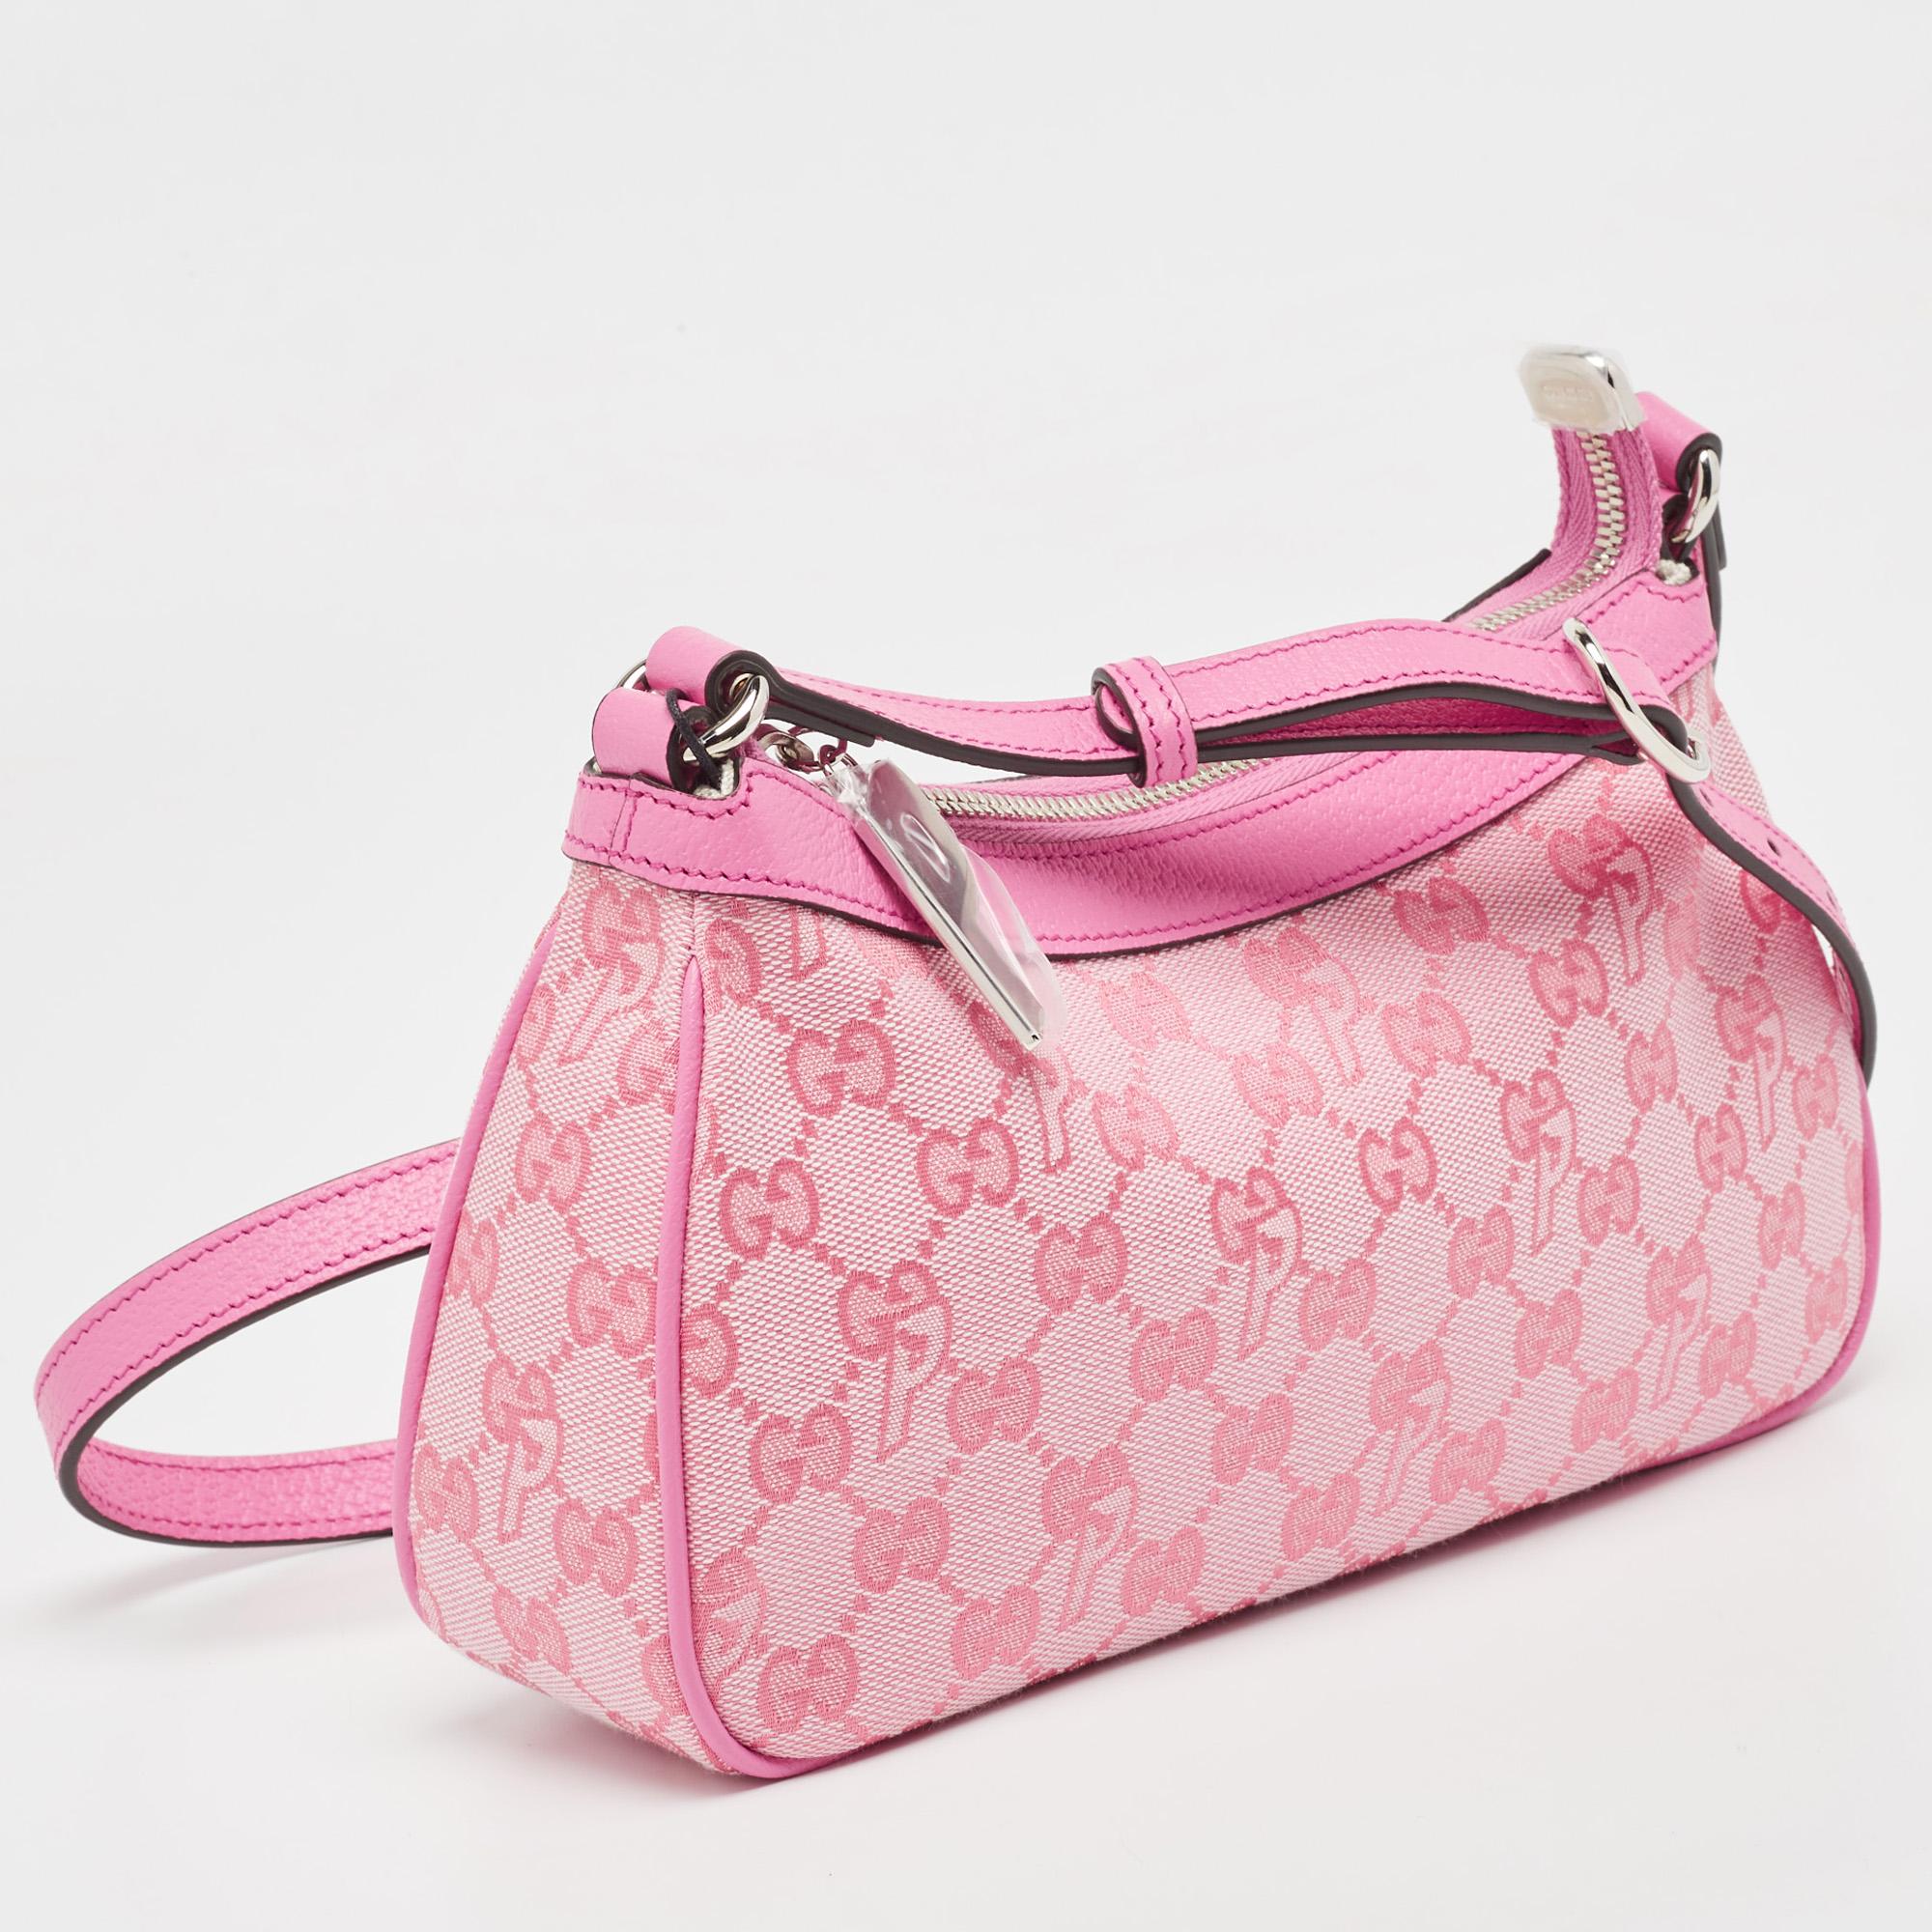 The Gucci x Palace bag embodies elegance and urban flair. Crafted from luxurious pink GG-P canvas, it features the iconic Palace logo, exuding contemporary style. Its compact design offers practicality without compromising on sophistication, making